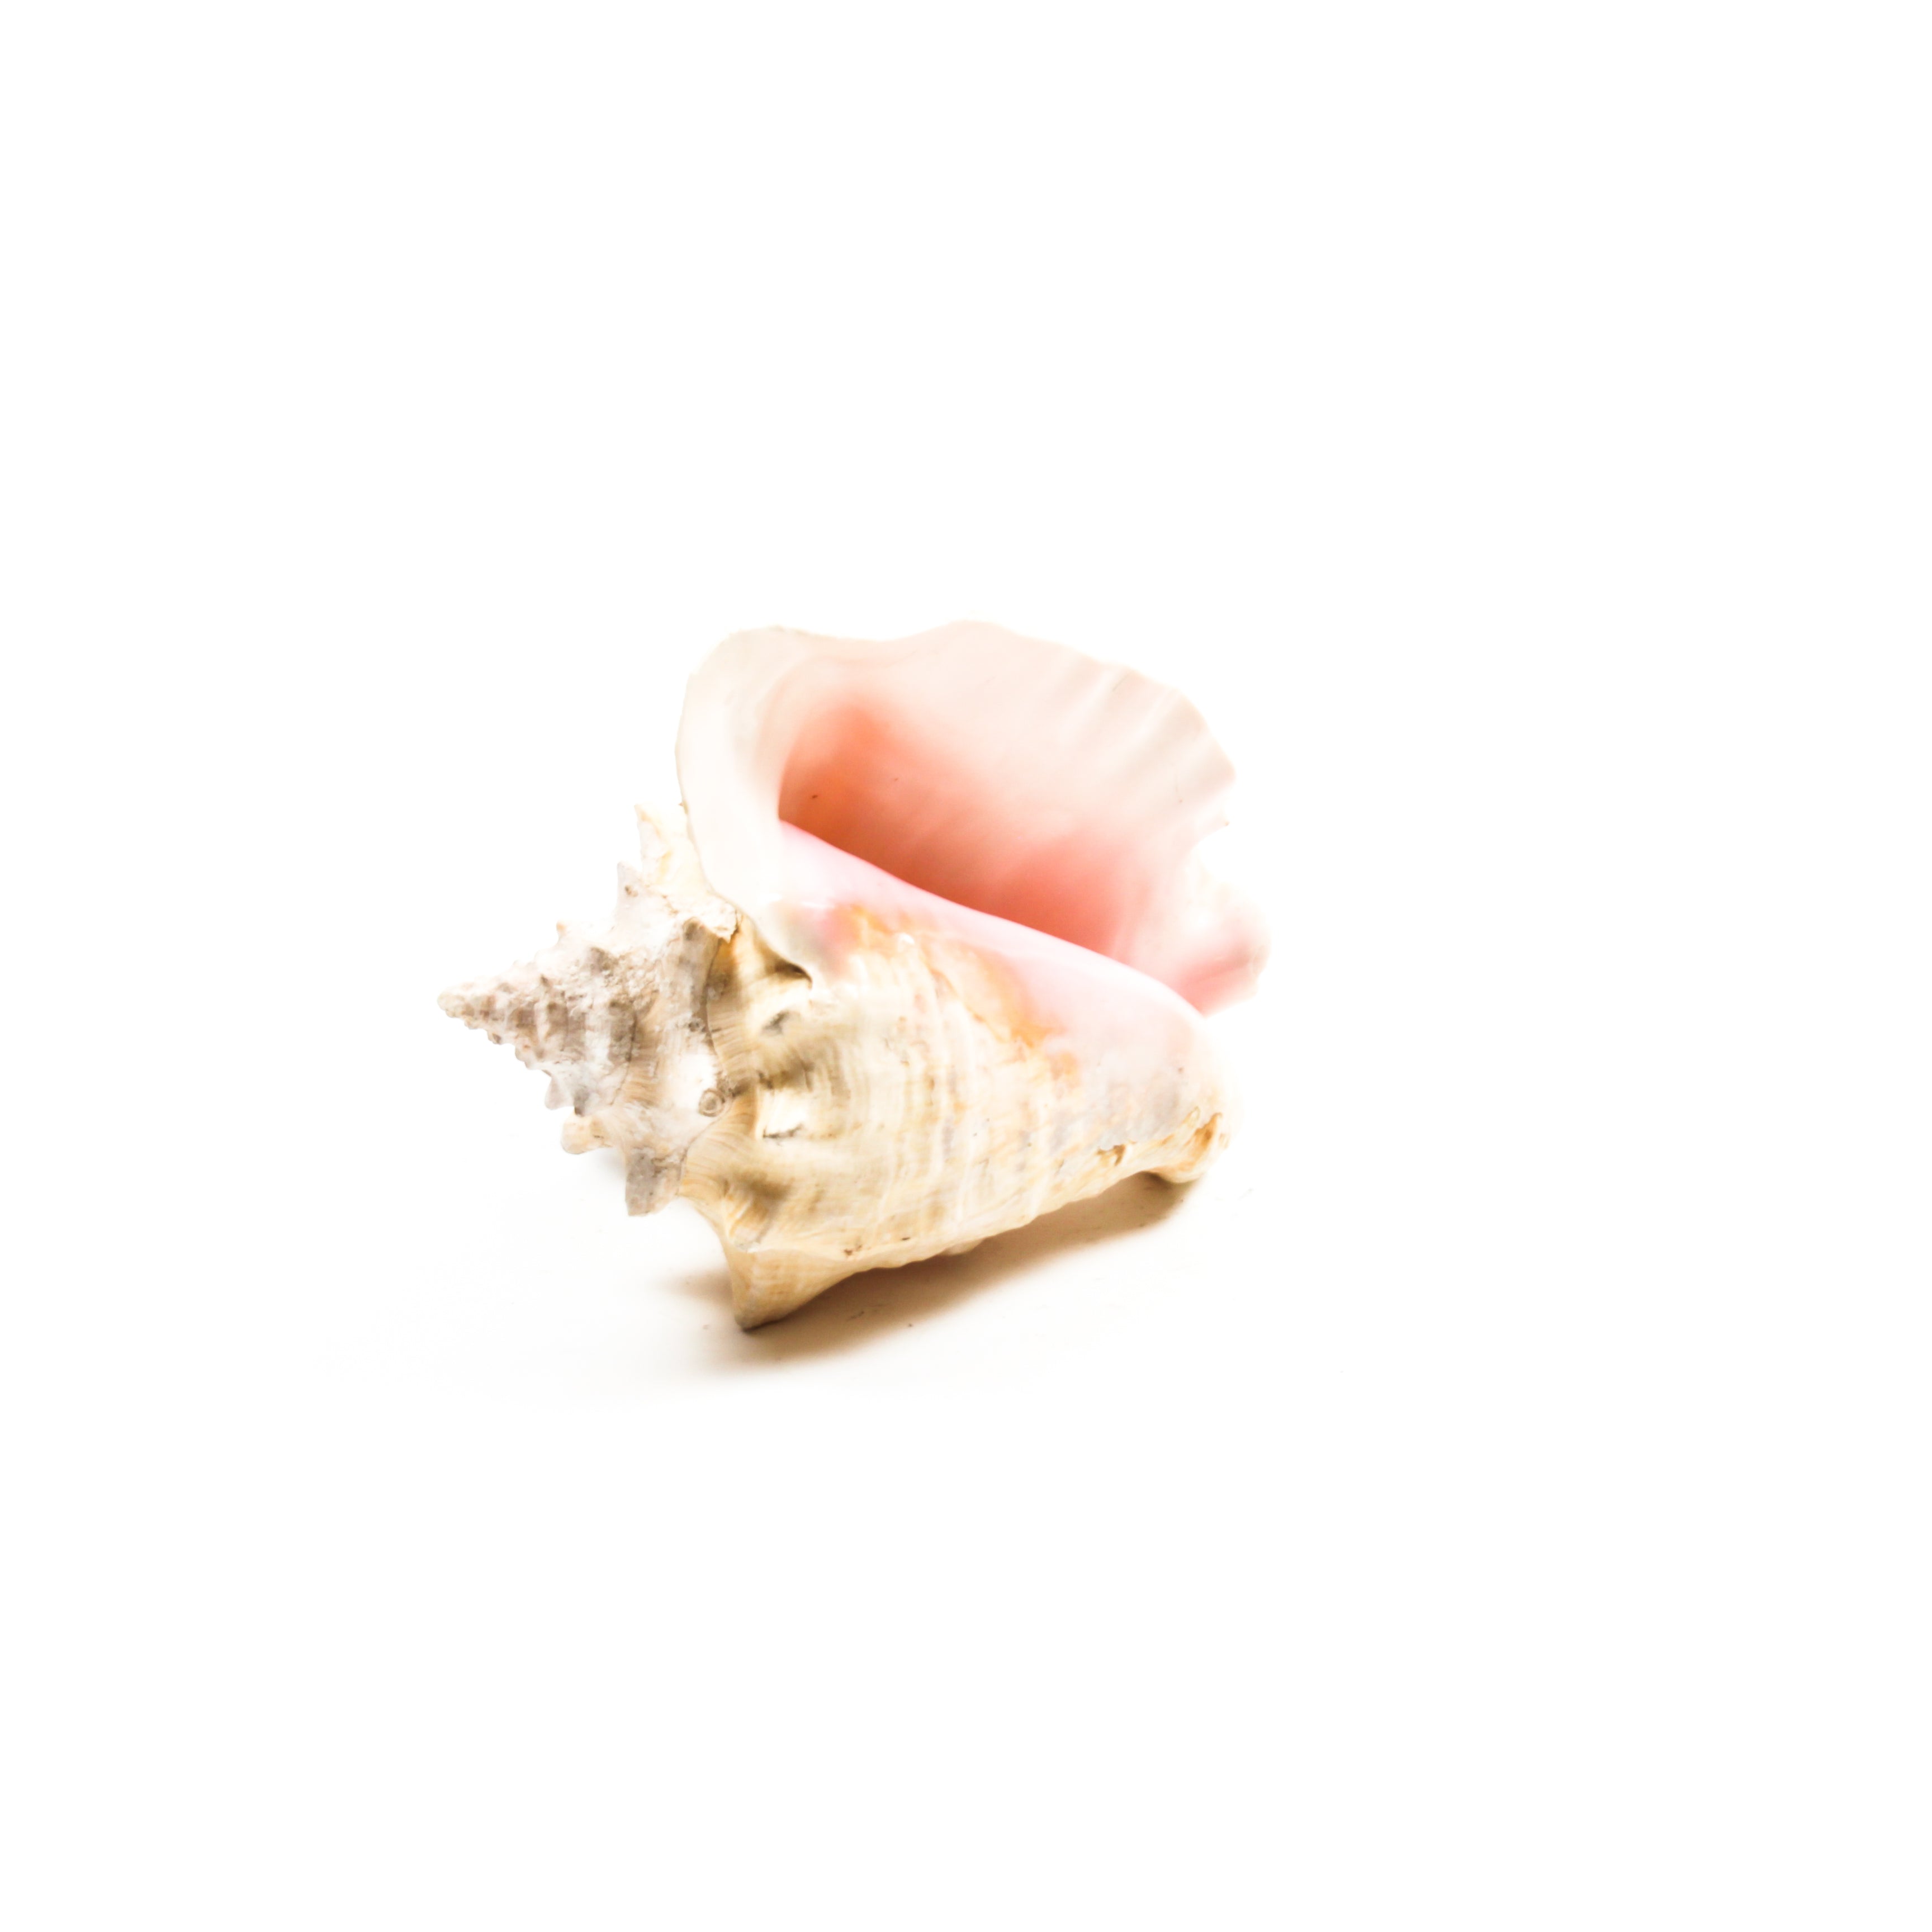 The Conch